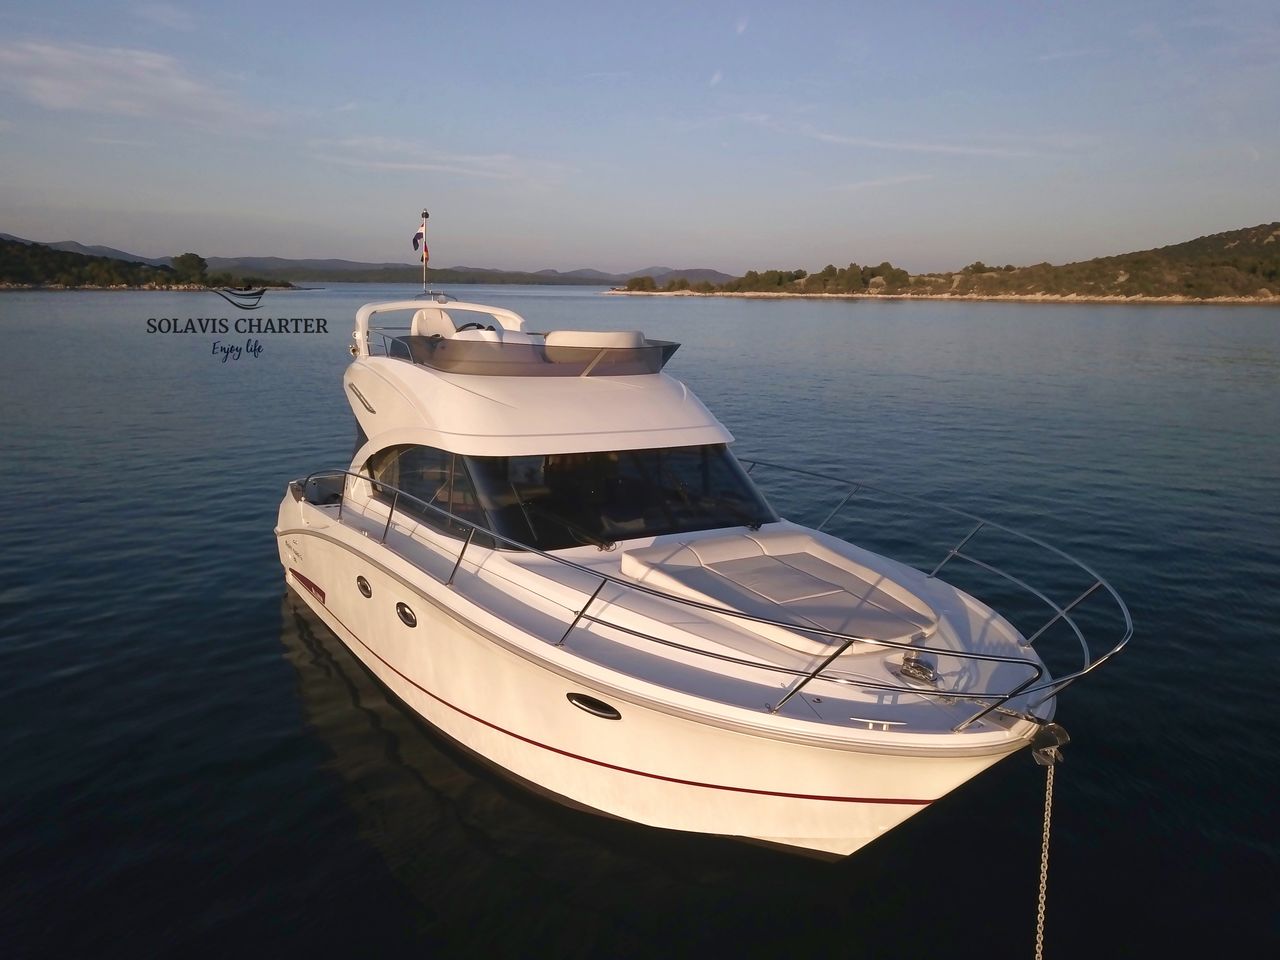 Antares 36 by Sea Dream Charter